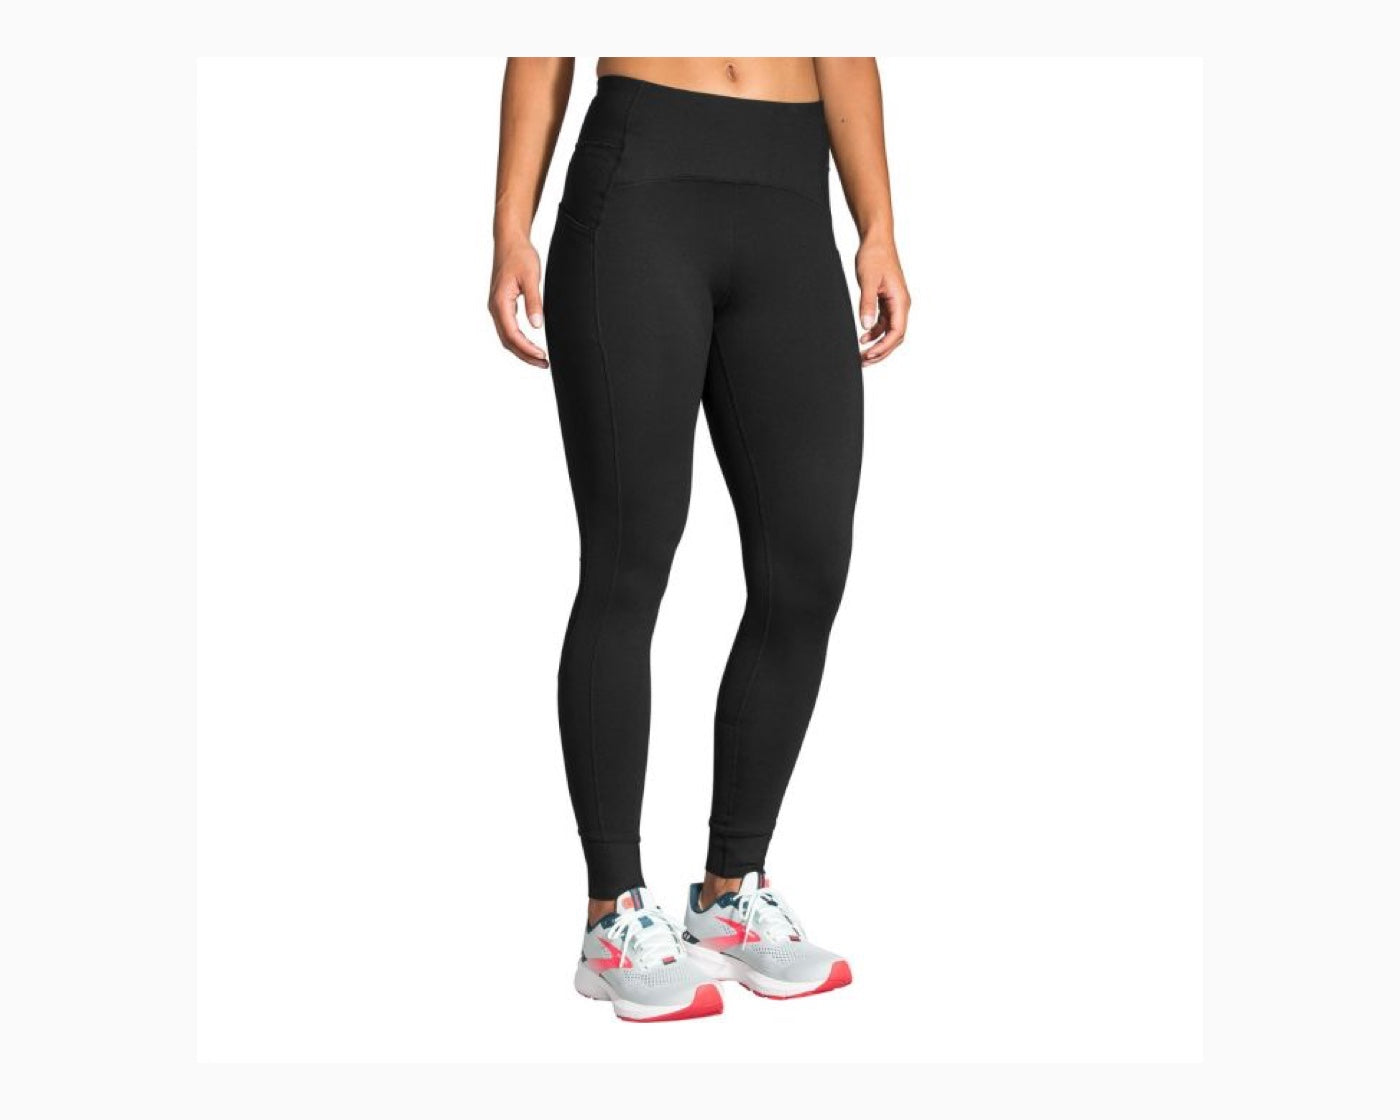 Under Armour Women's Fall Hi-Rise Tight